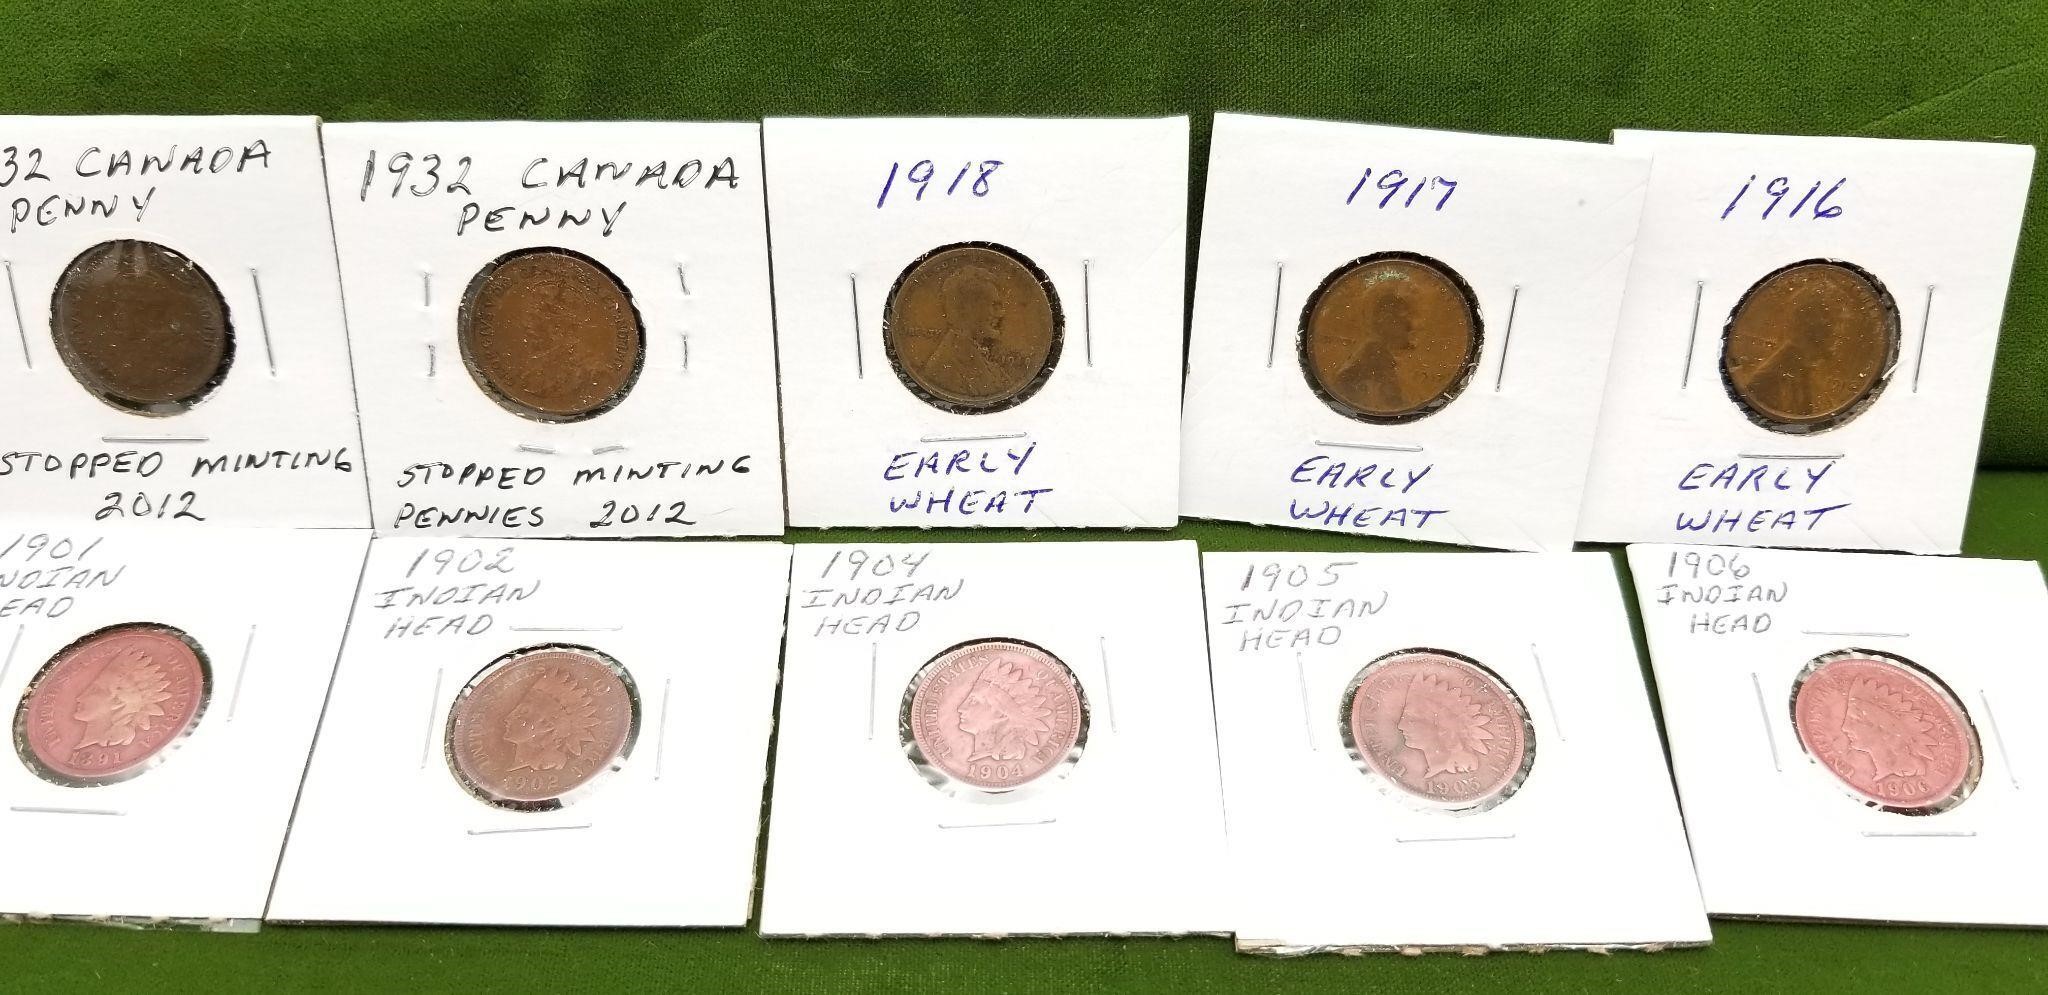 5 INDIAN HEAD-3 EARLY WHEAT-2 CANADIAN PENNIES